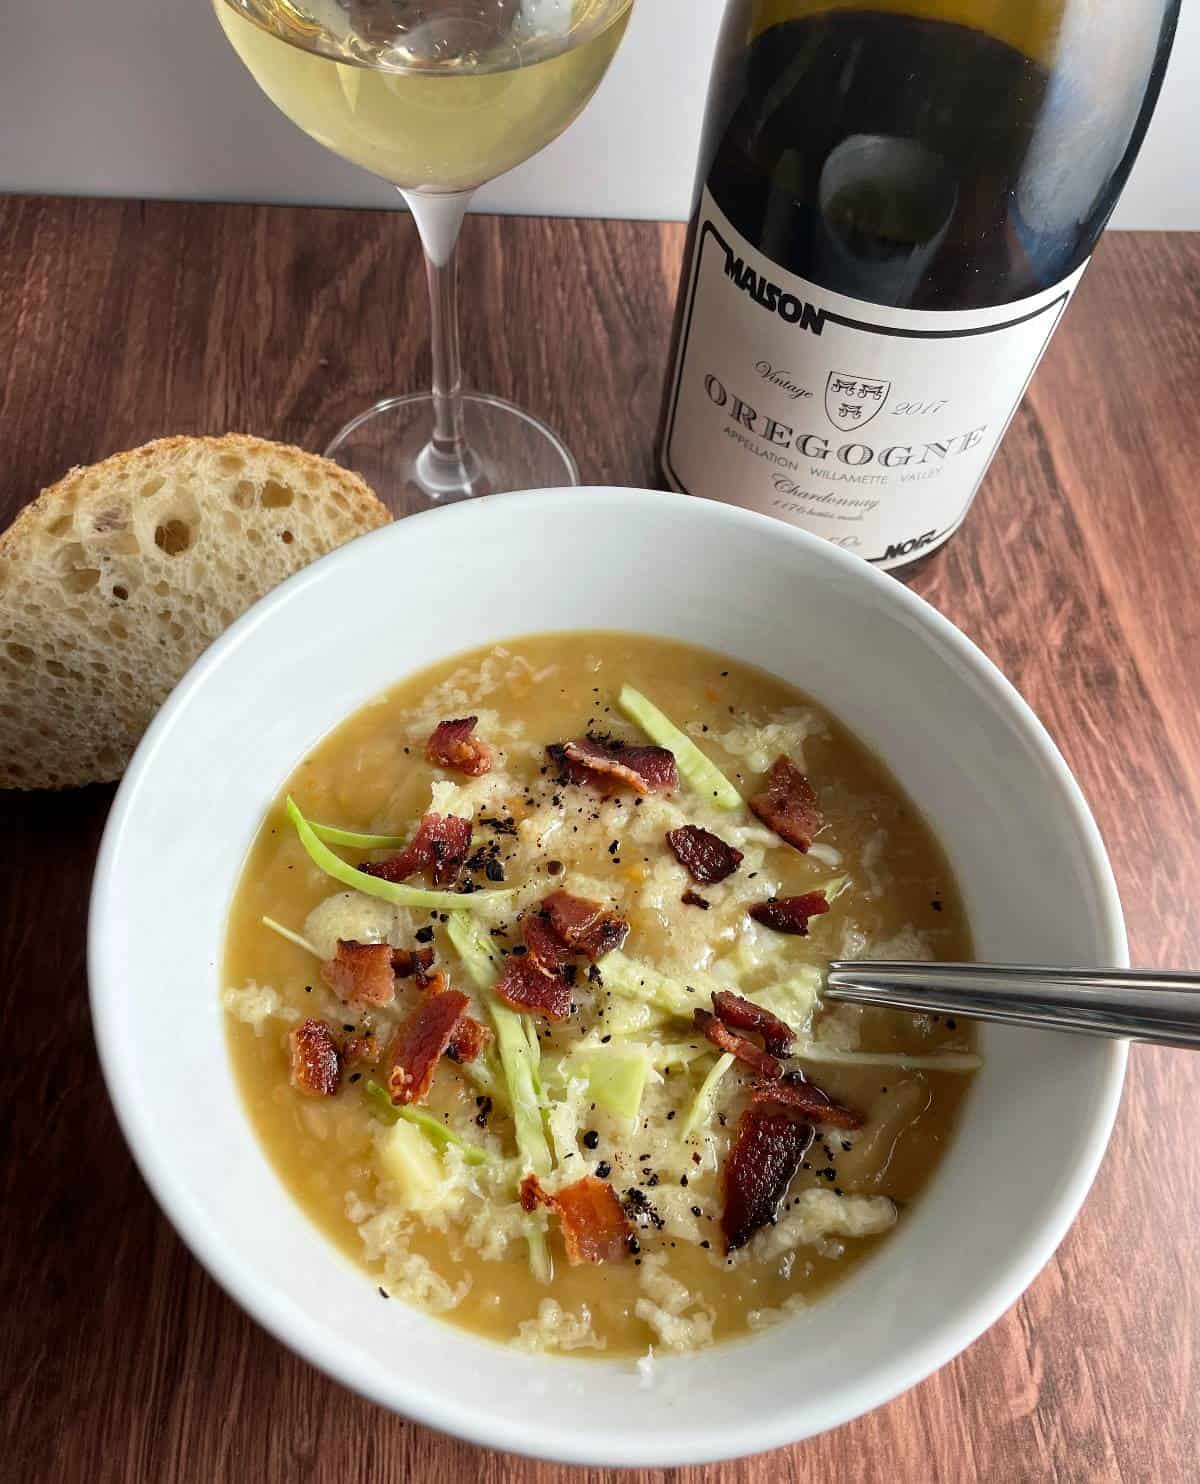 Bowl of Irish Potato Cabbage Soup topped with bacon and served with a Chardonnay.